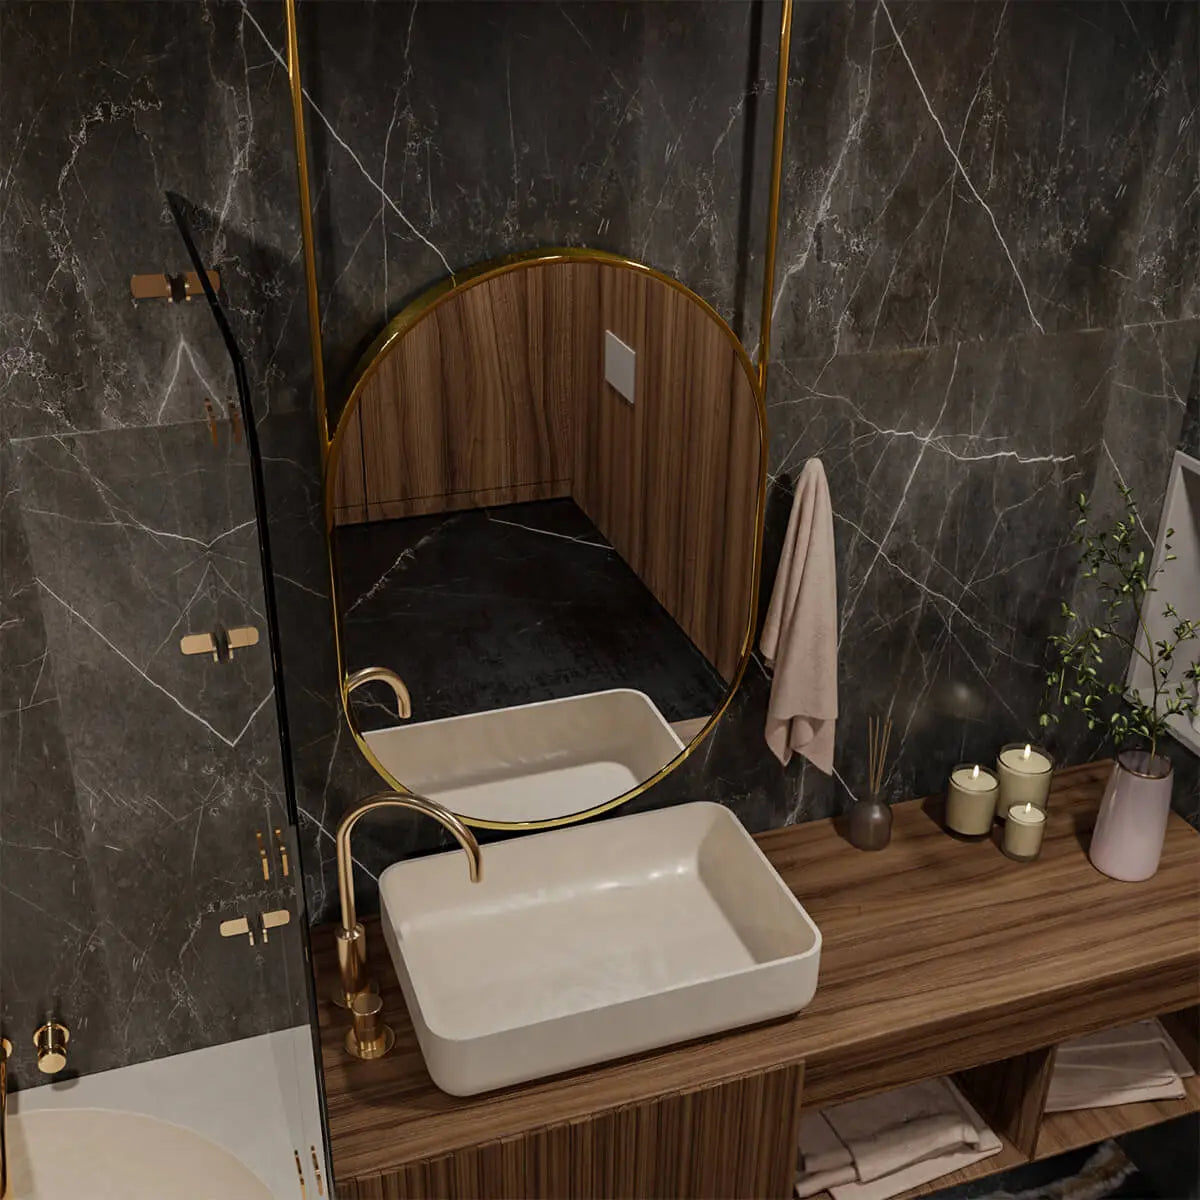 A bathroom shelf with a black metal frame featuring two glass jars with bamboo lids filled with cotton balls and cotton swabs. A white ceramic soap dispenser with a matte black pump sits next to the jars. In the background is a metal framed mirror with a gold finish.